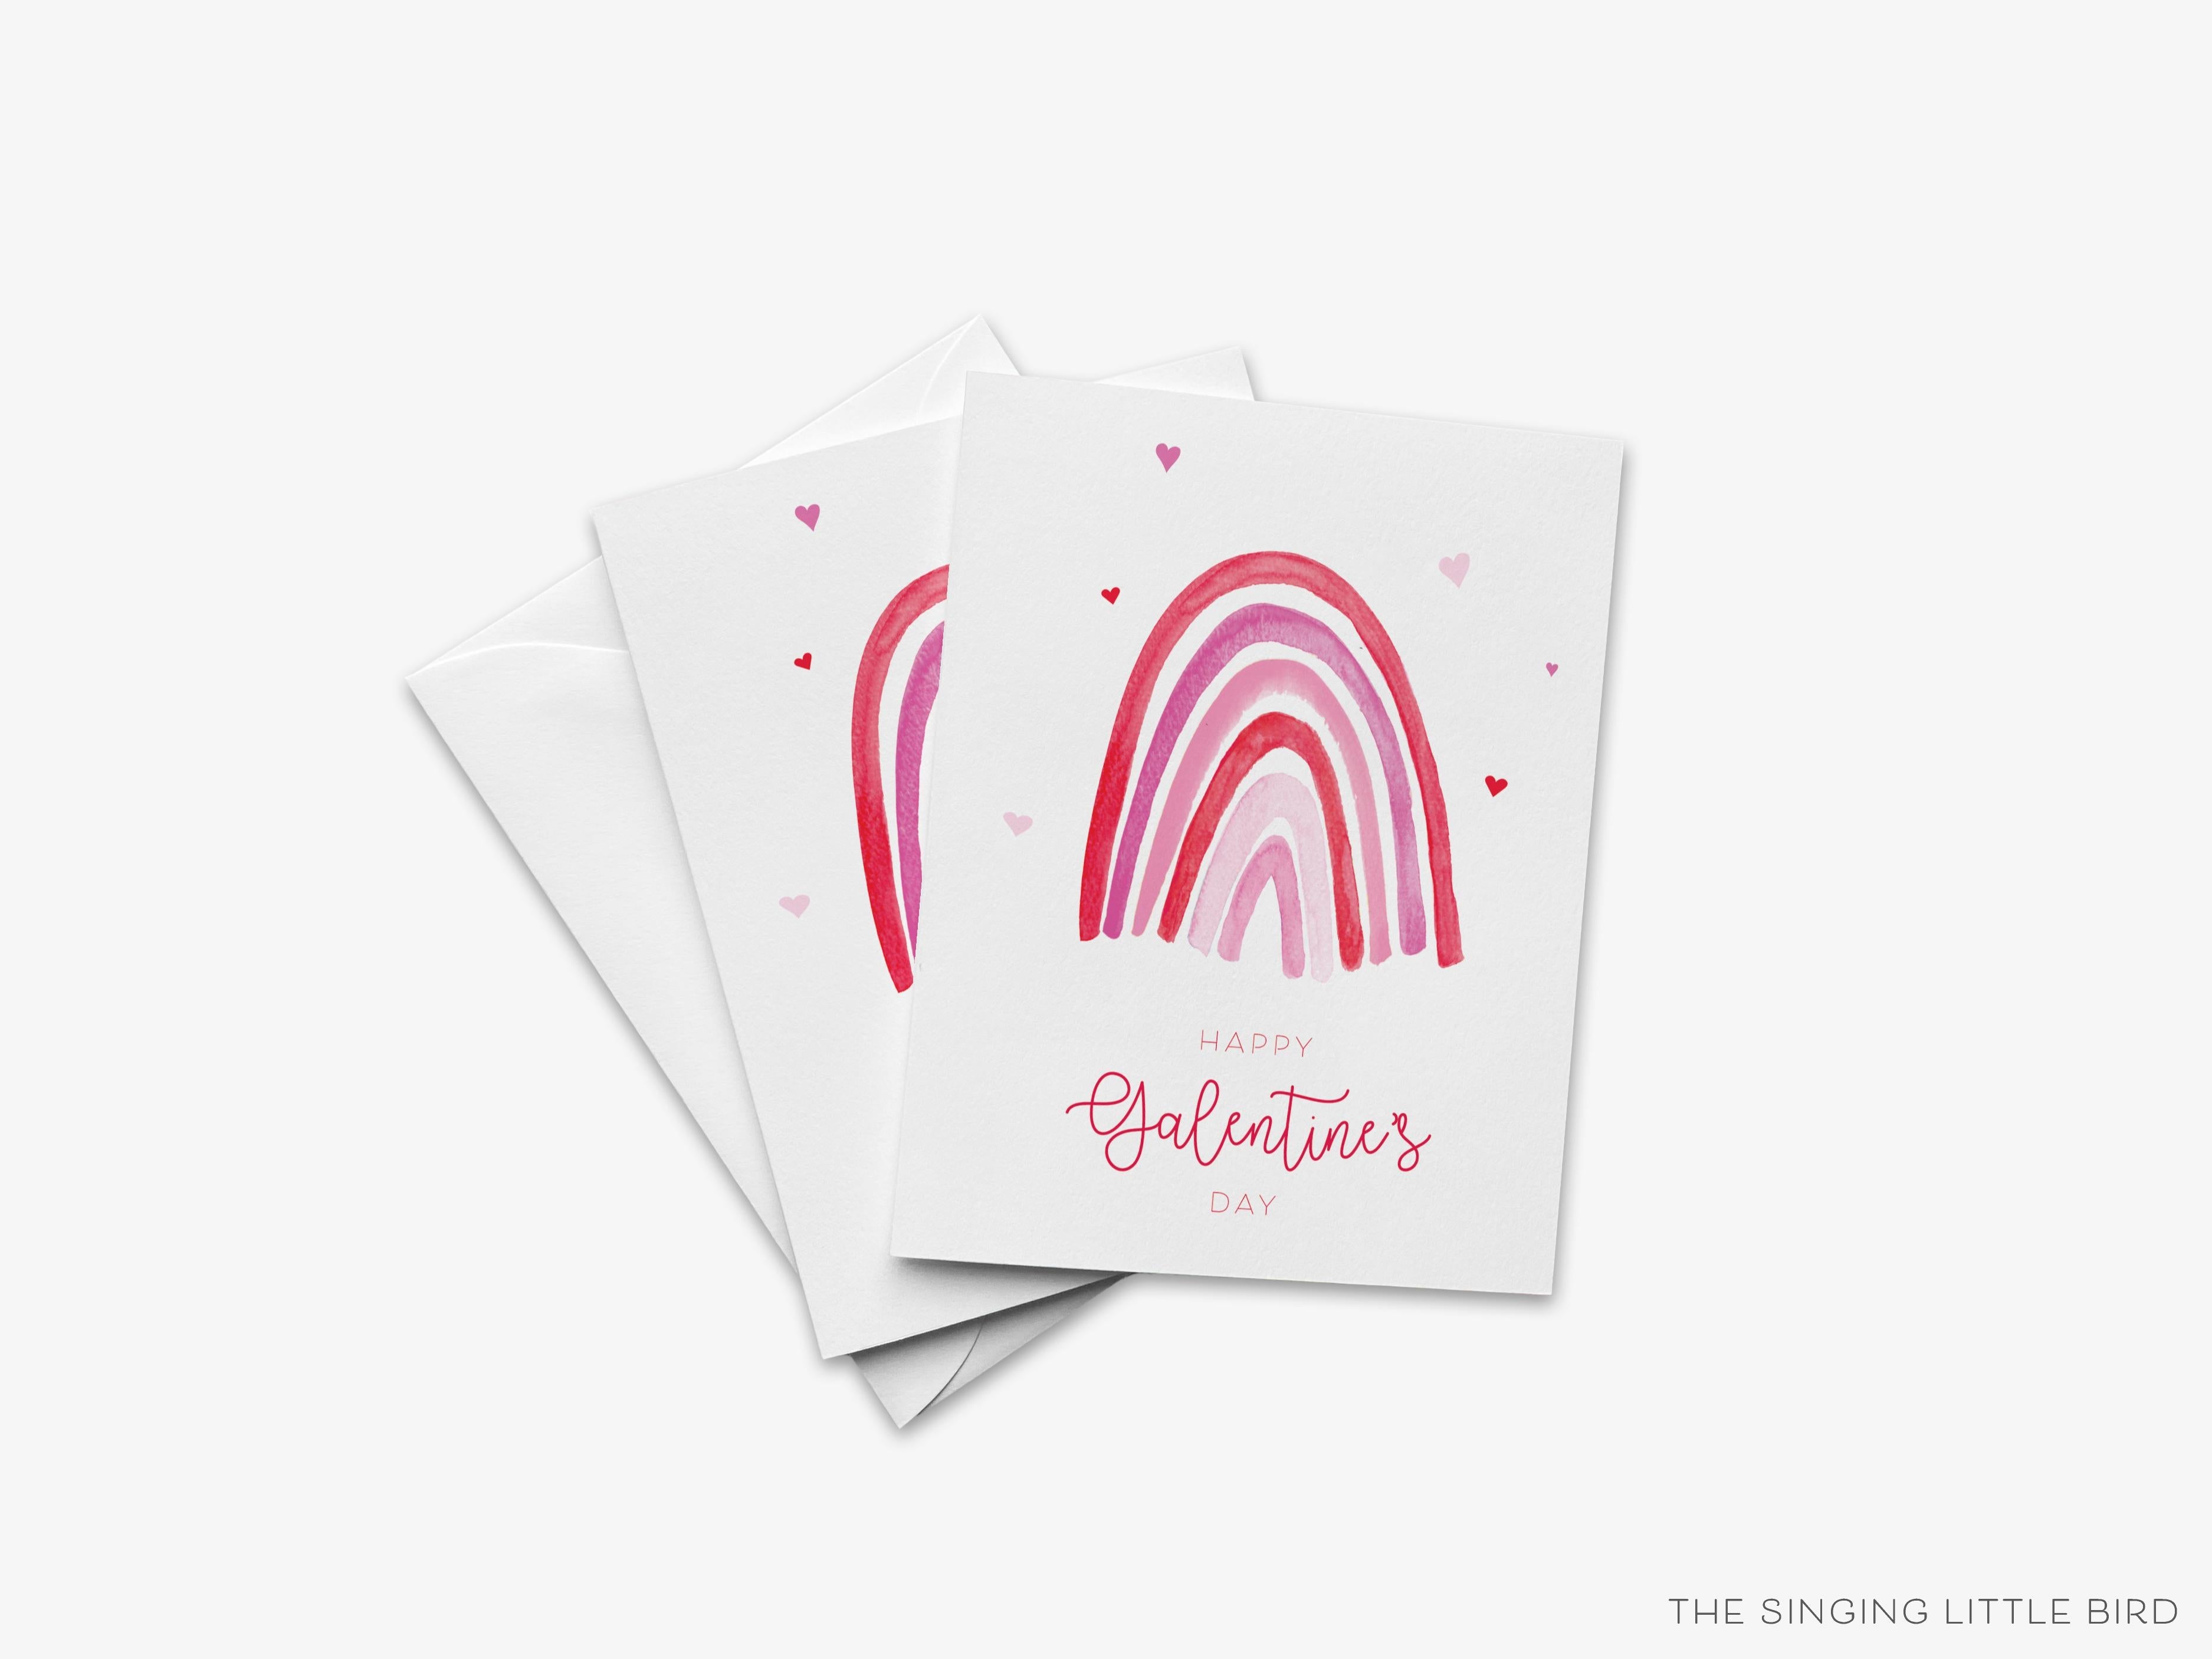 Galentine's Rainbow Greeting Card-These folded greeting cards are 4.25x5.5 and feature our hand-painted pink rainbow, printed in the USA on 100lb textured stock. They come with a White envelope and make a great Galentine's Day card for the gal pal in your life.-The Singing Little Bird